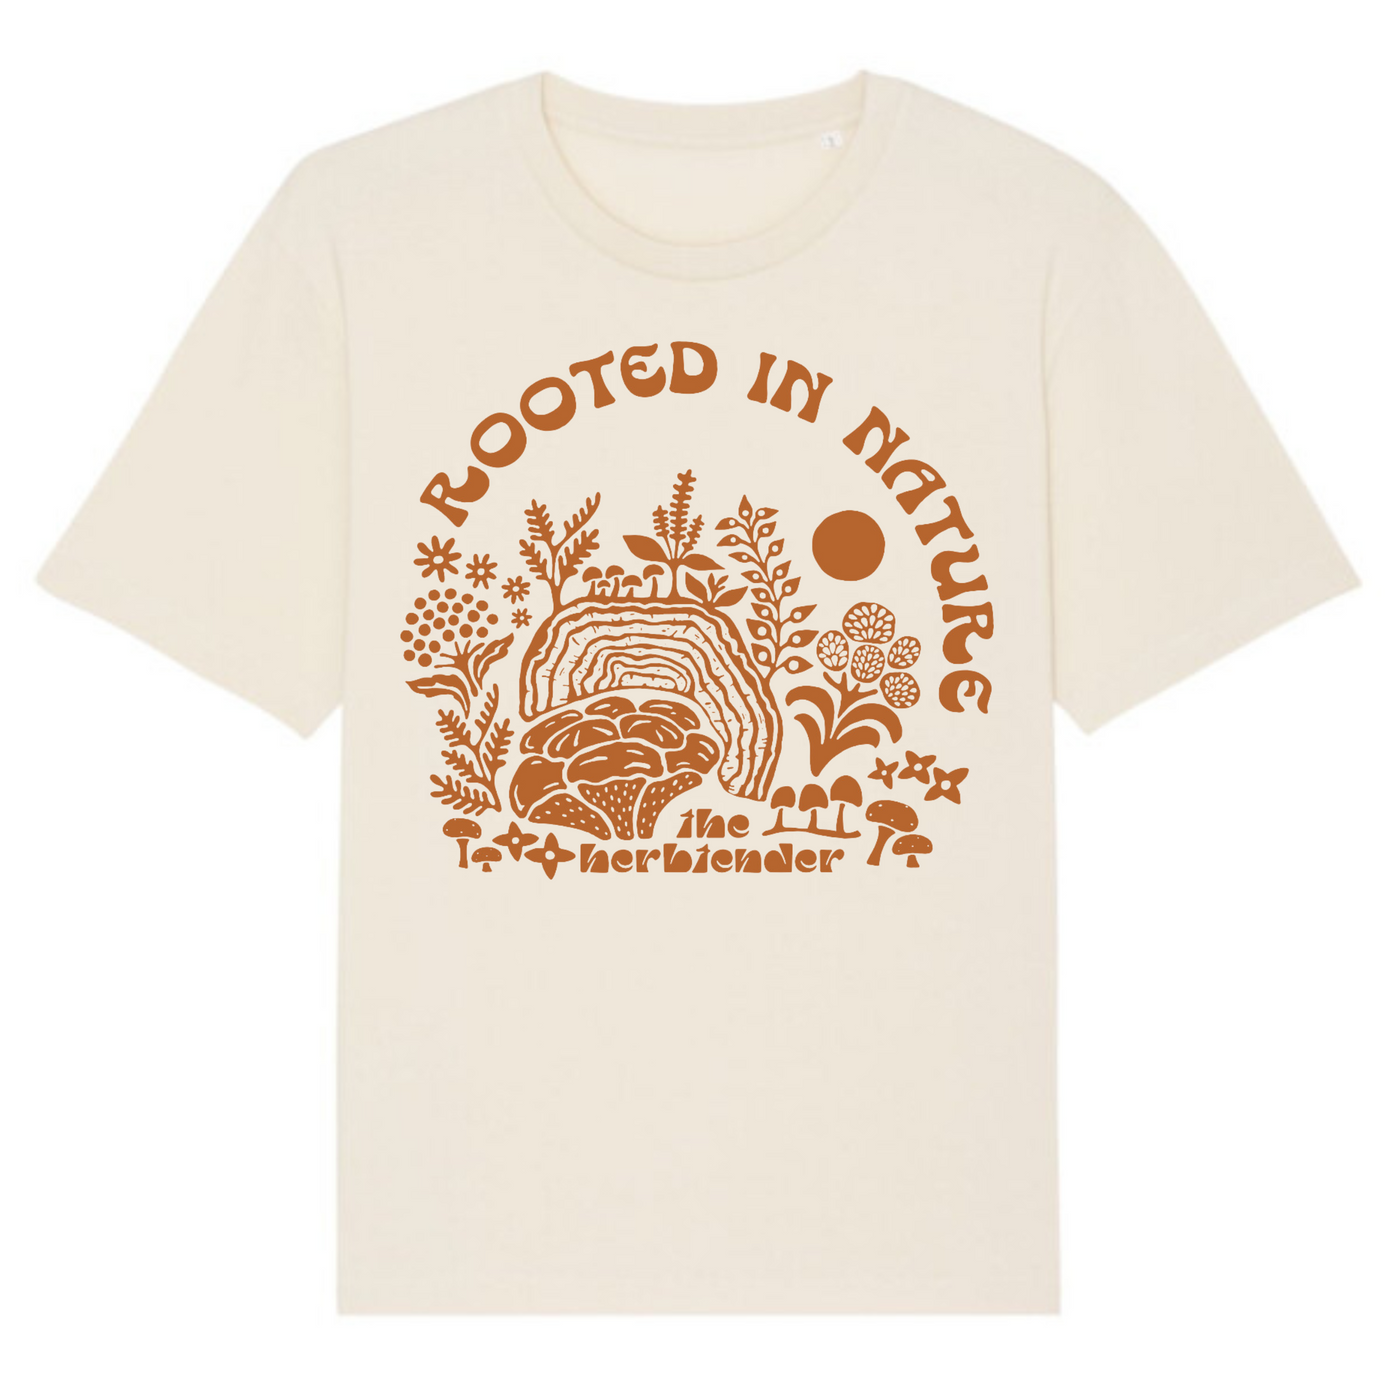 Planet-friendly ‘Rooted in Nature’ t-shirt